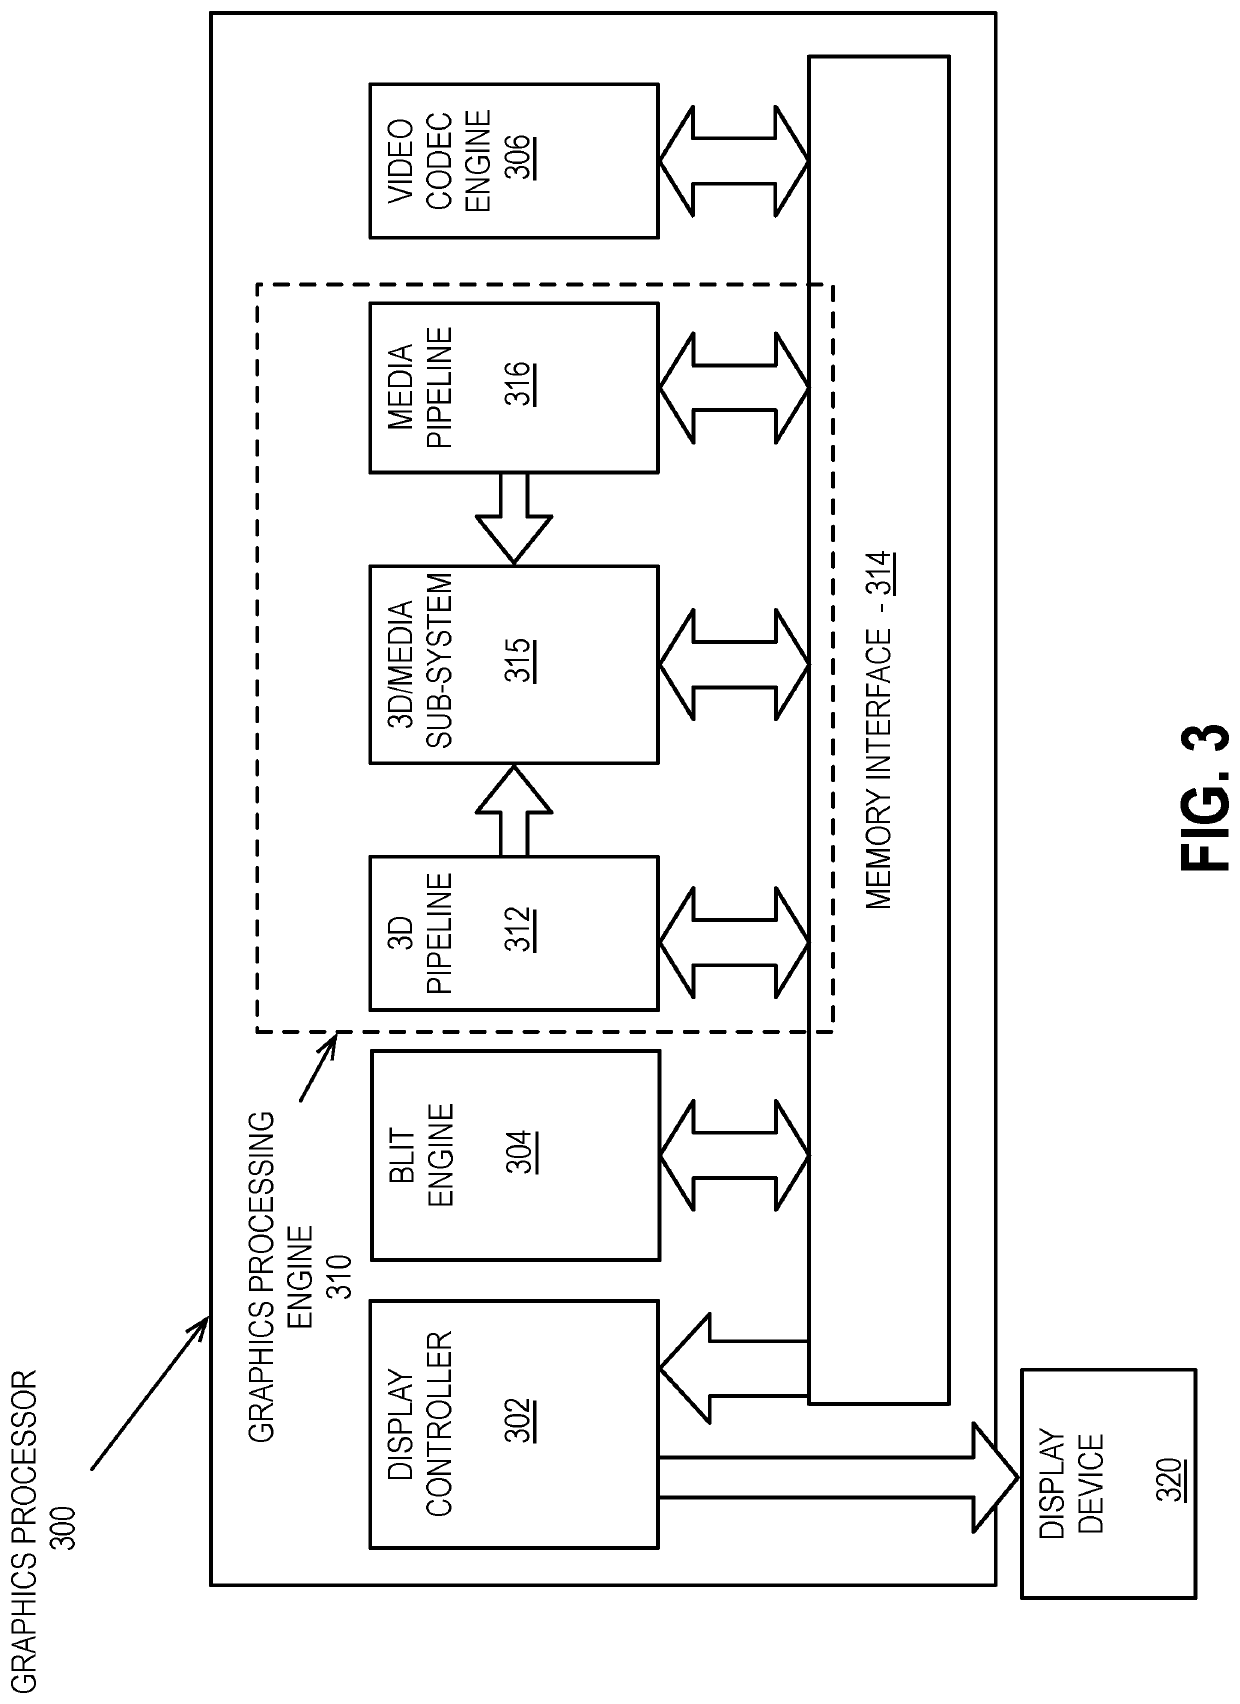 Ray tracing apparatus and method for memory access and register operations